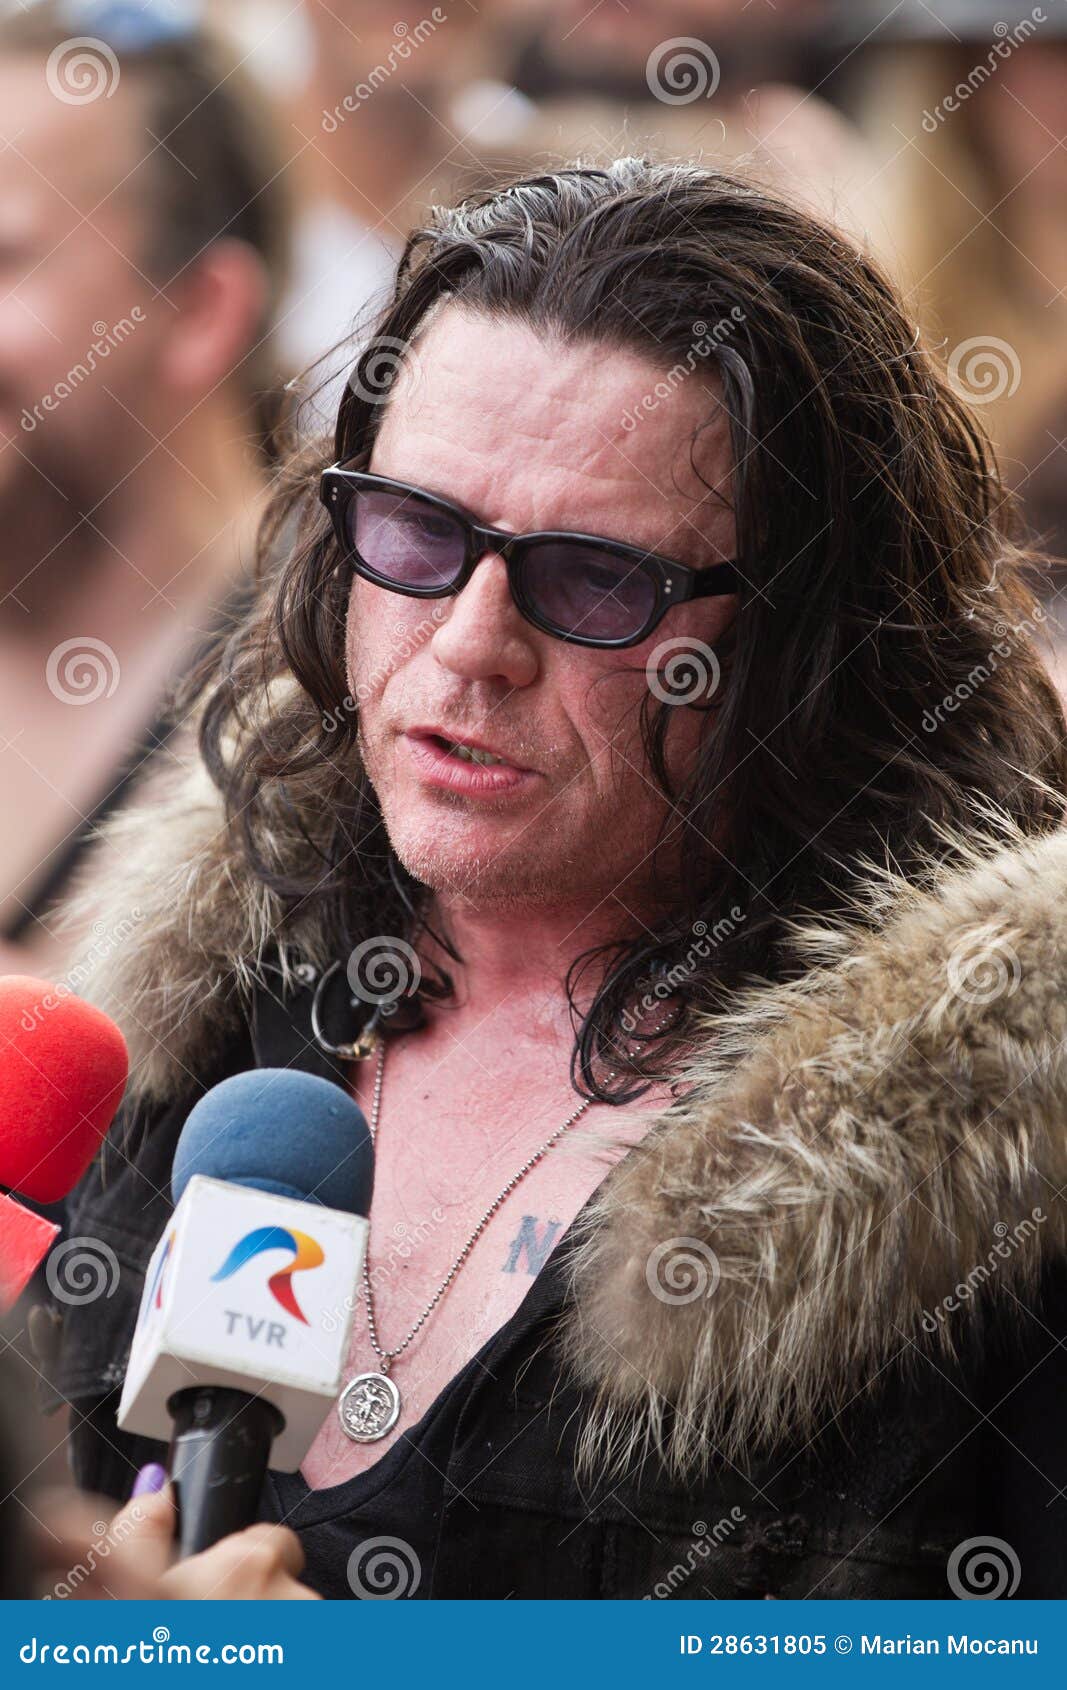 Ian Robert Astbury (born 14 May 1962, Heswall, Merseyside) is an English rock musician and songwriter best known as the lead vocalist for the rock band The ... - ian-astbury-28631805